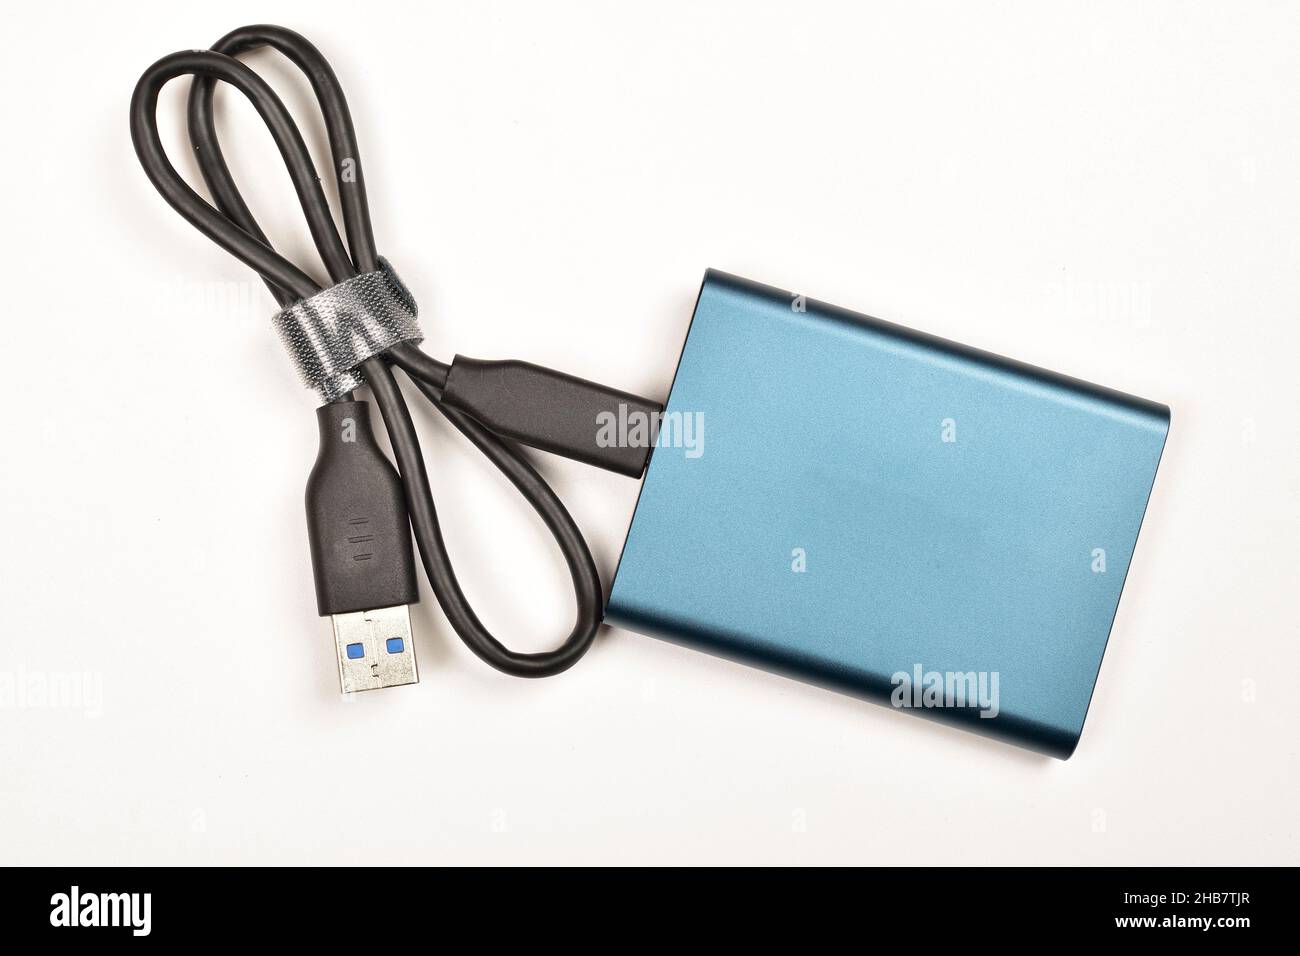 Solid-state Drive (SSD) And SATA Cable On White Background Stock